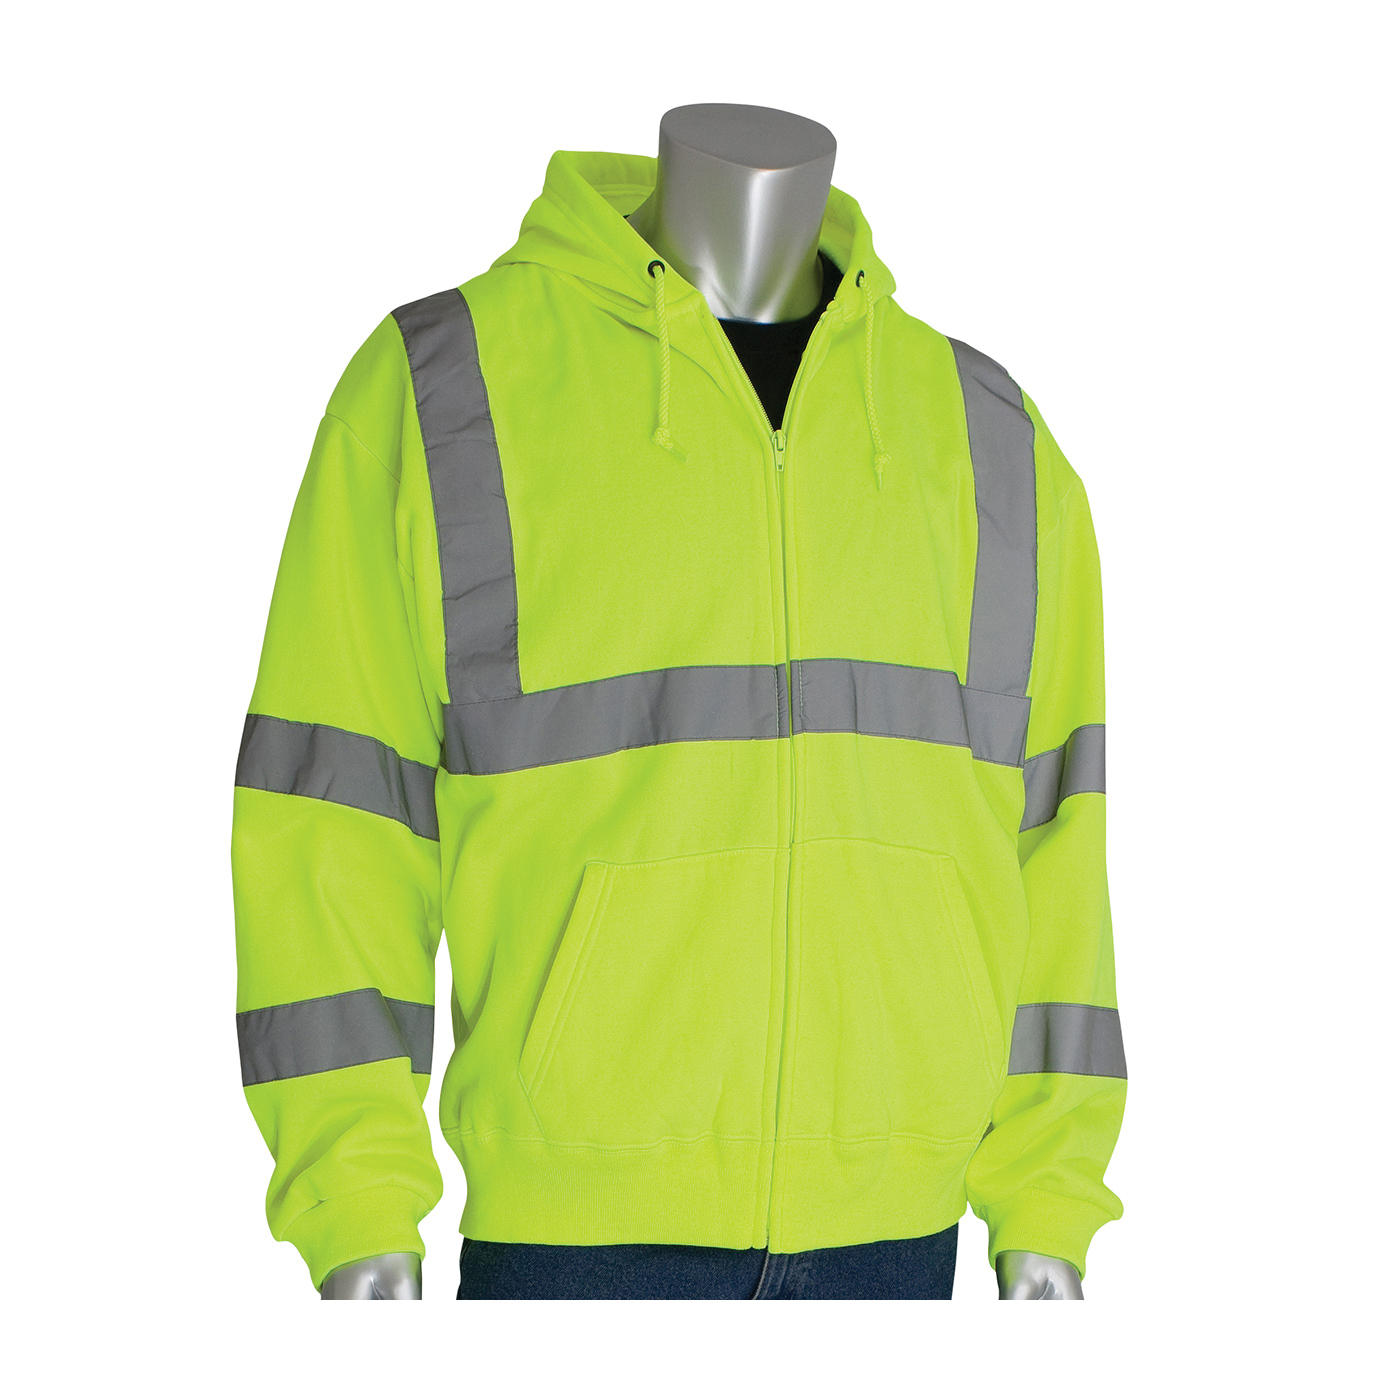 PIP® SafetyGear 323-HSSELY-L Premium High Visibility Sweatshirt, L, Yellow, Wicking Polyester, 27-1/2 in L